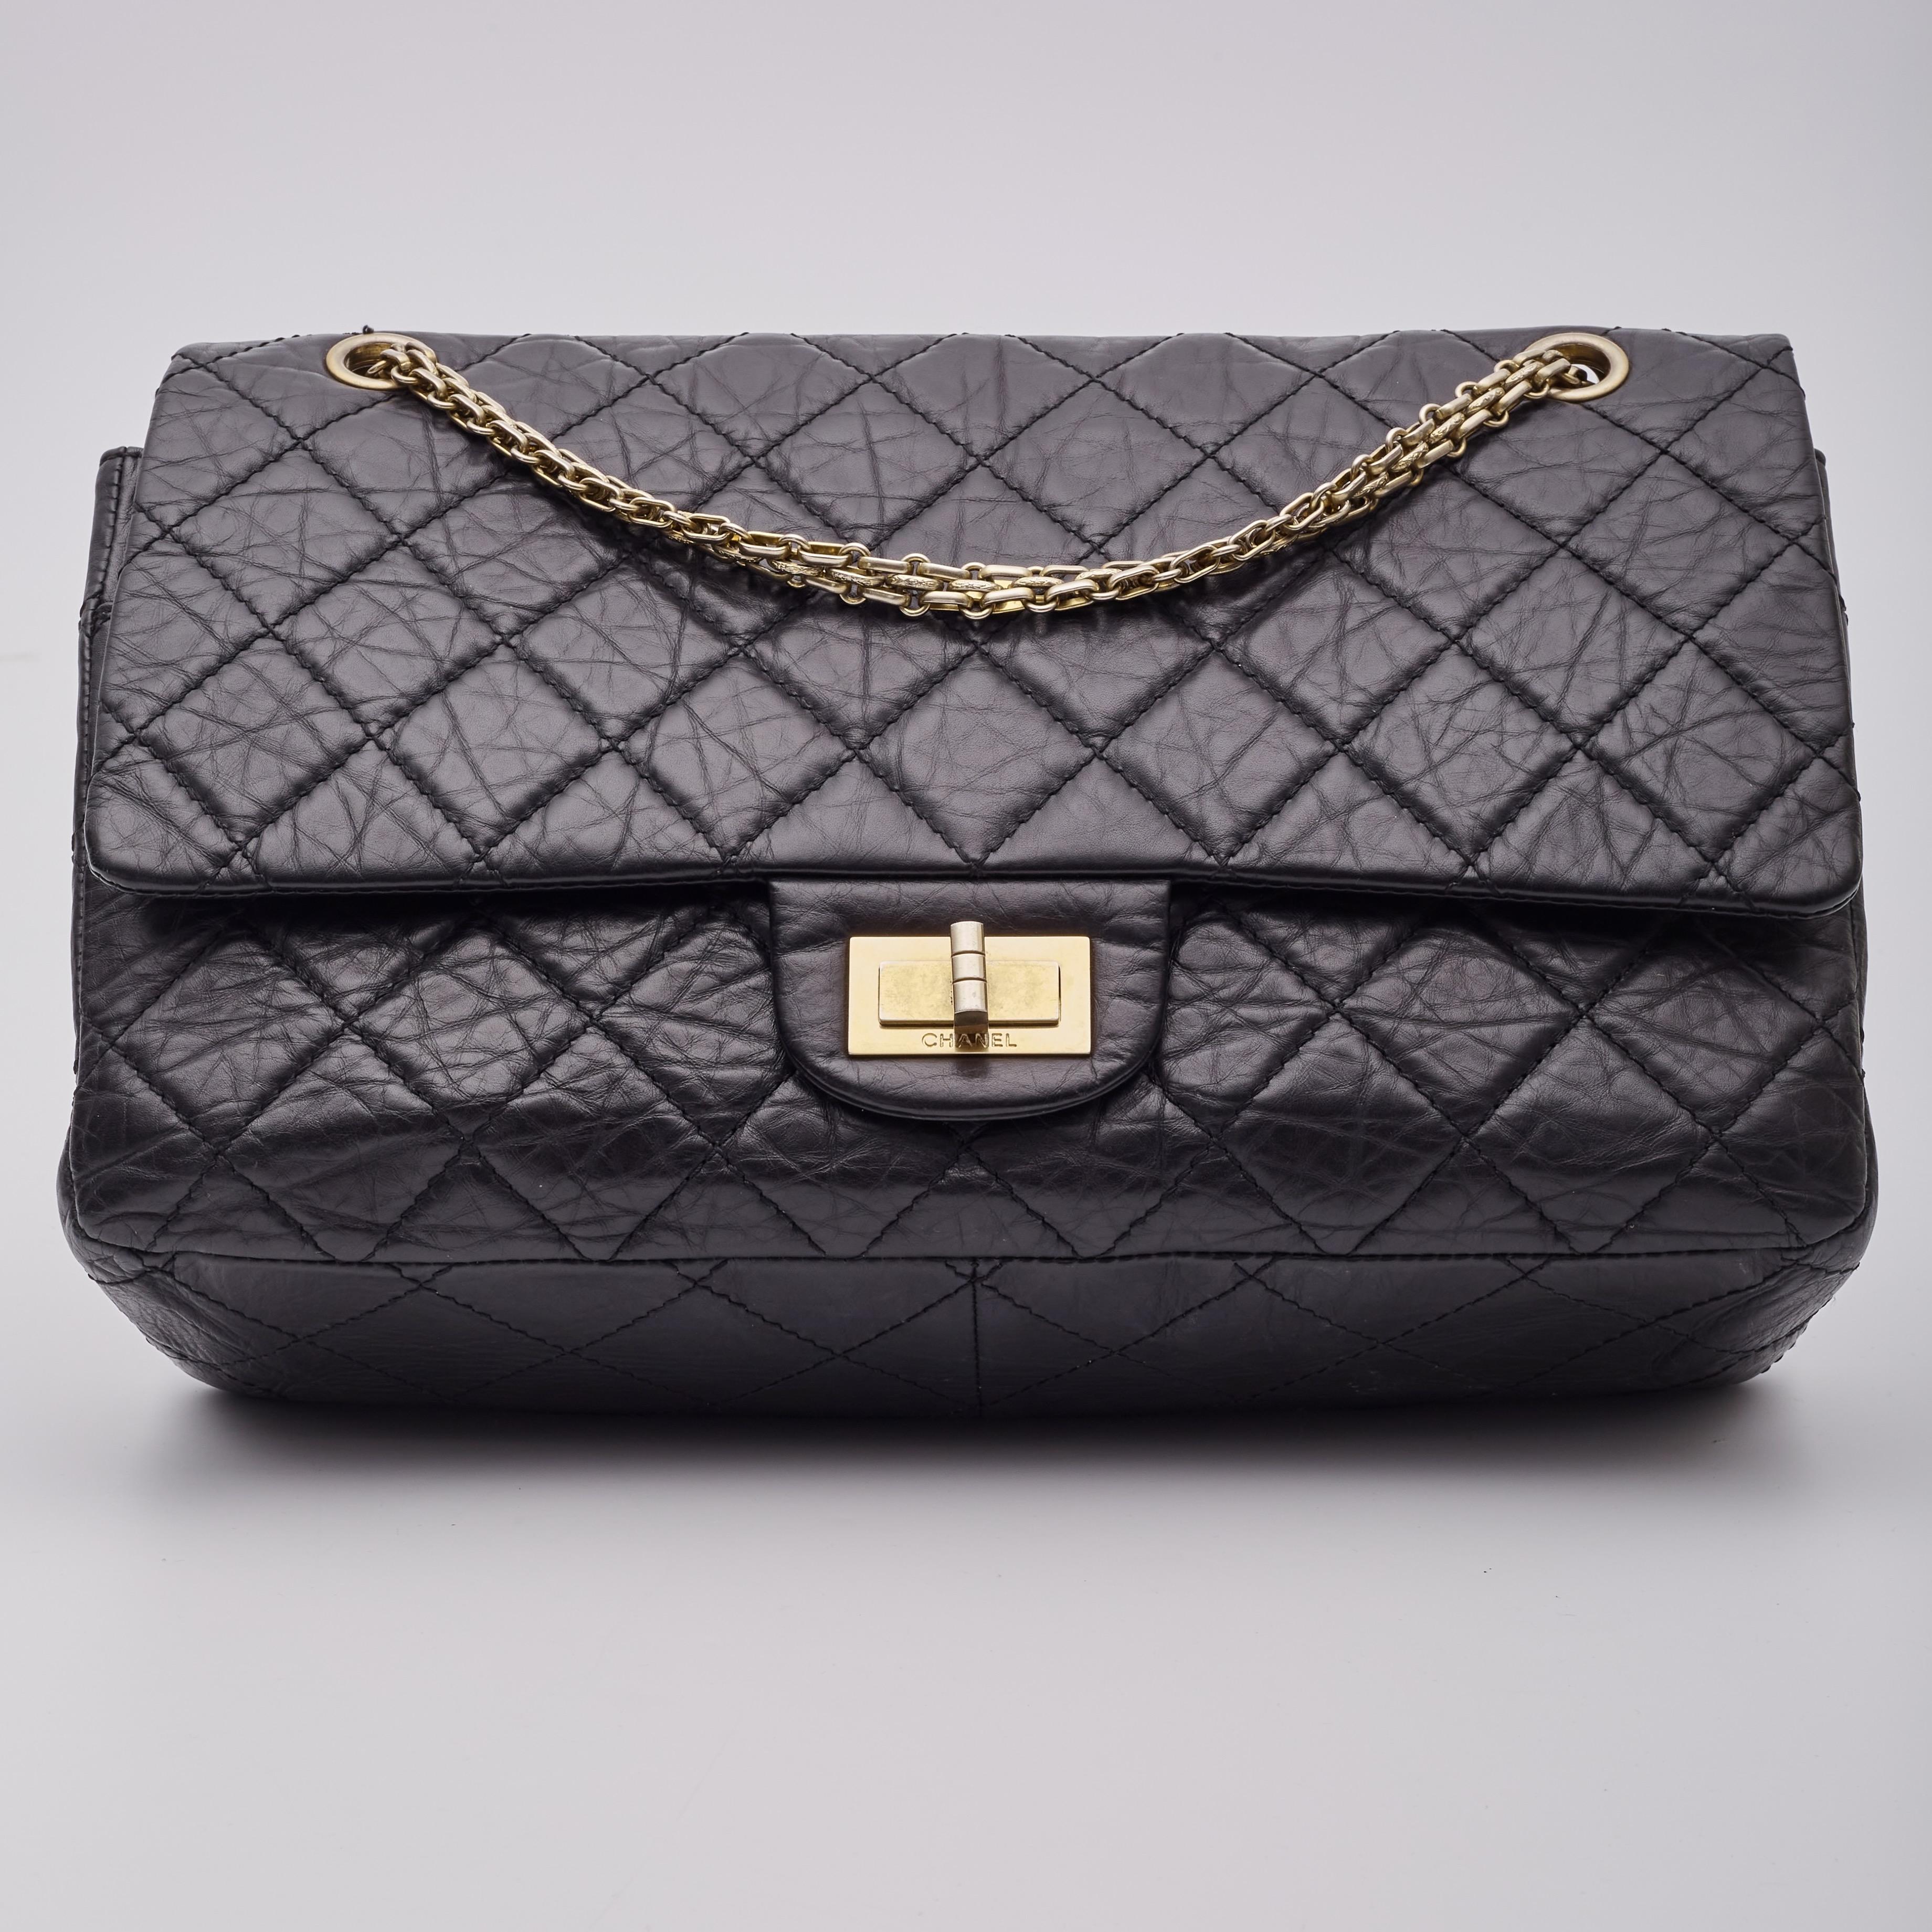 Chanel Calfskin Black Reissue 2.55 227 Flap Bag In Good Condition For Sale In Montreal, Quebec